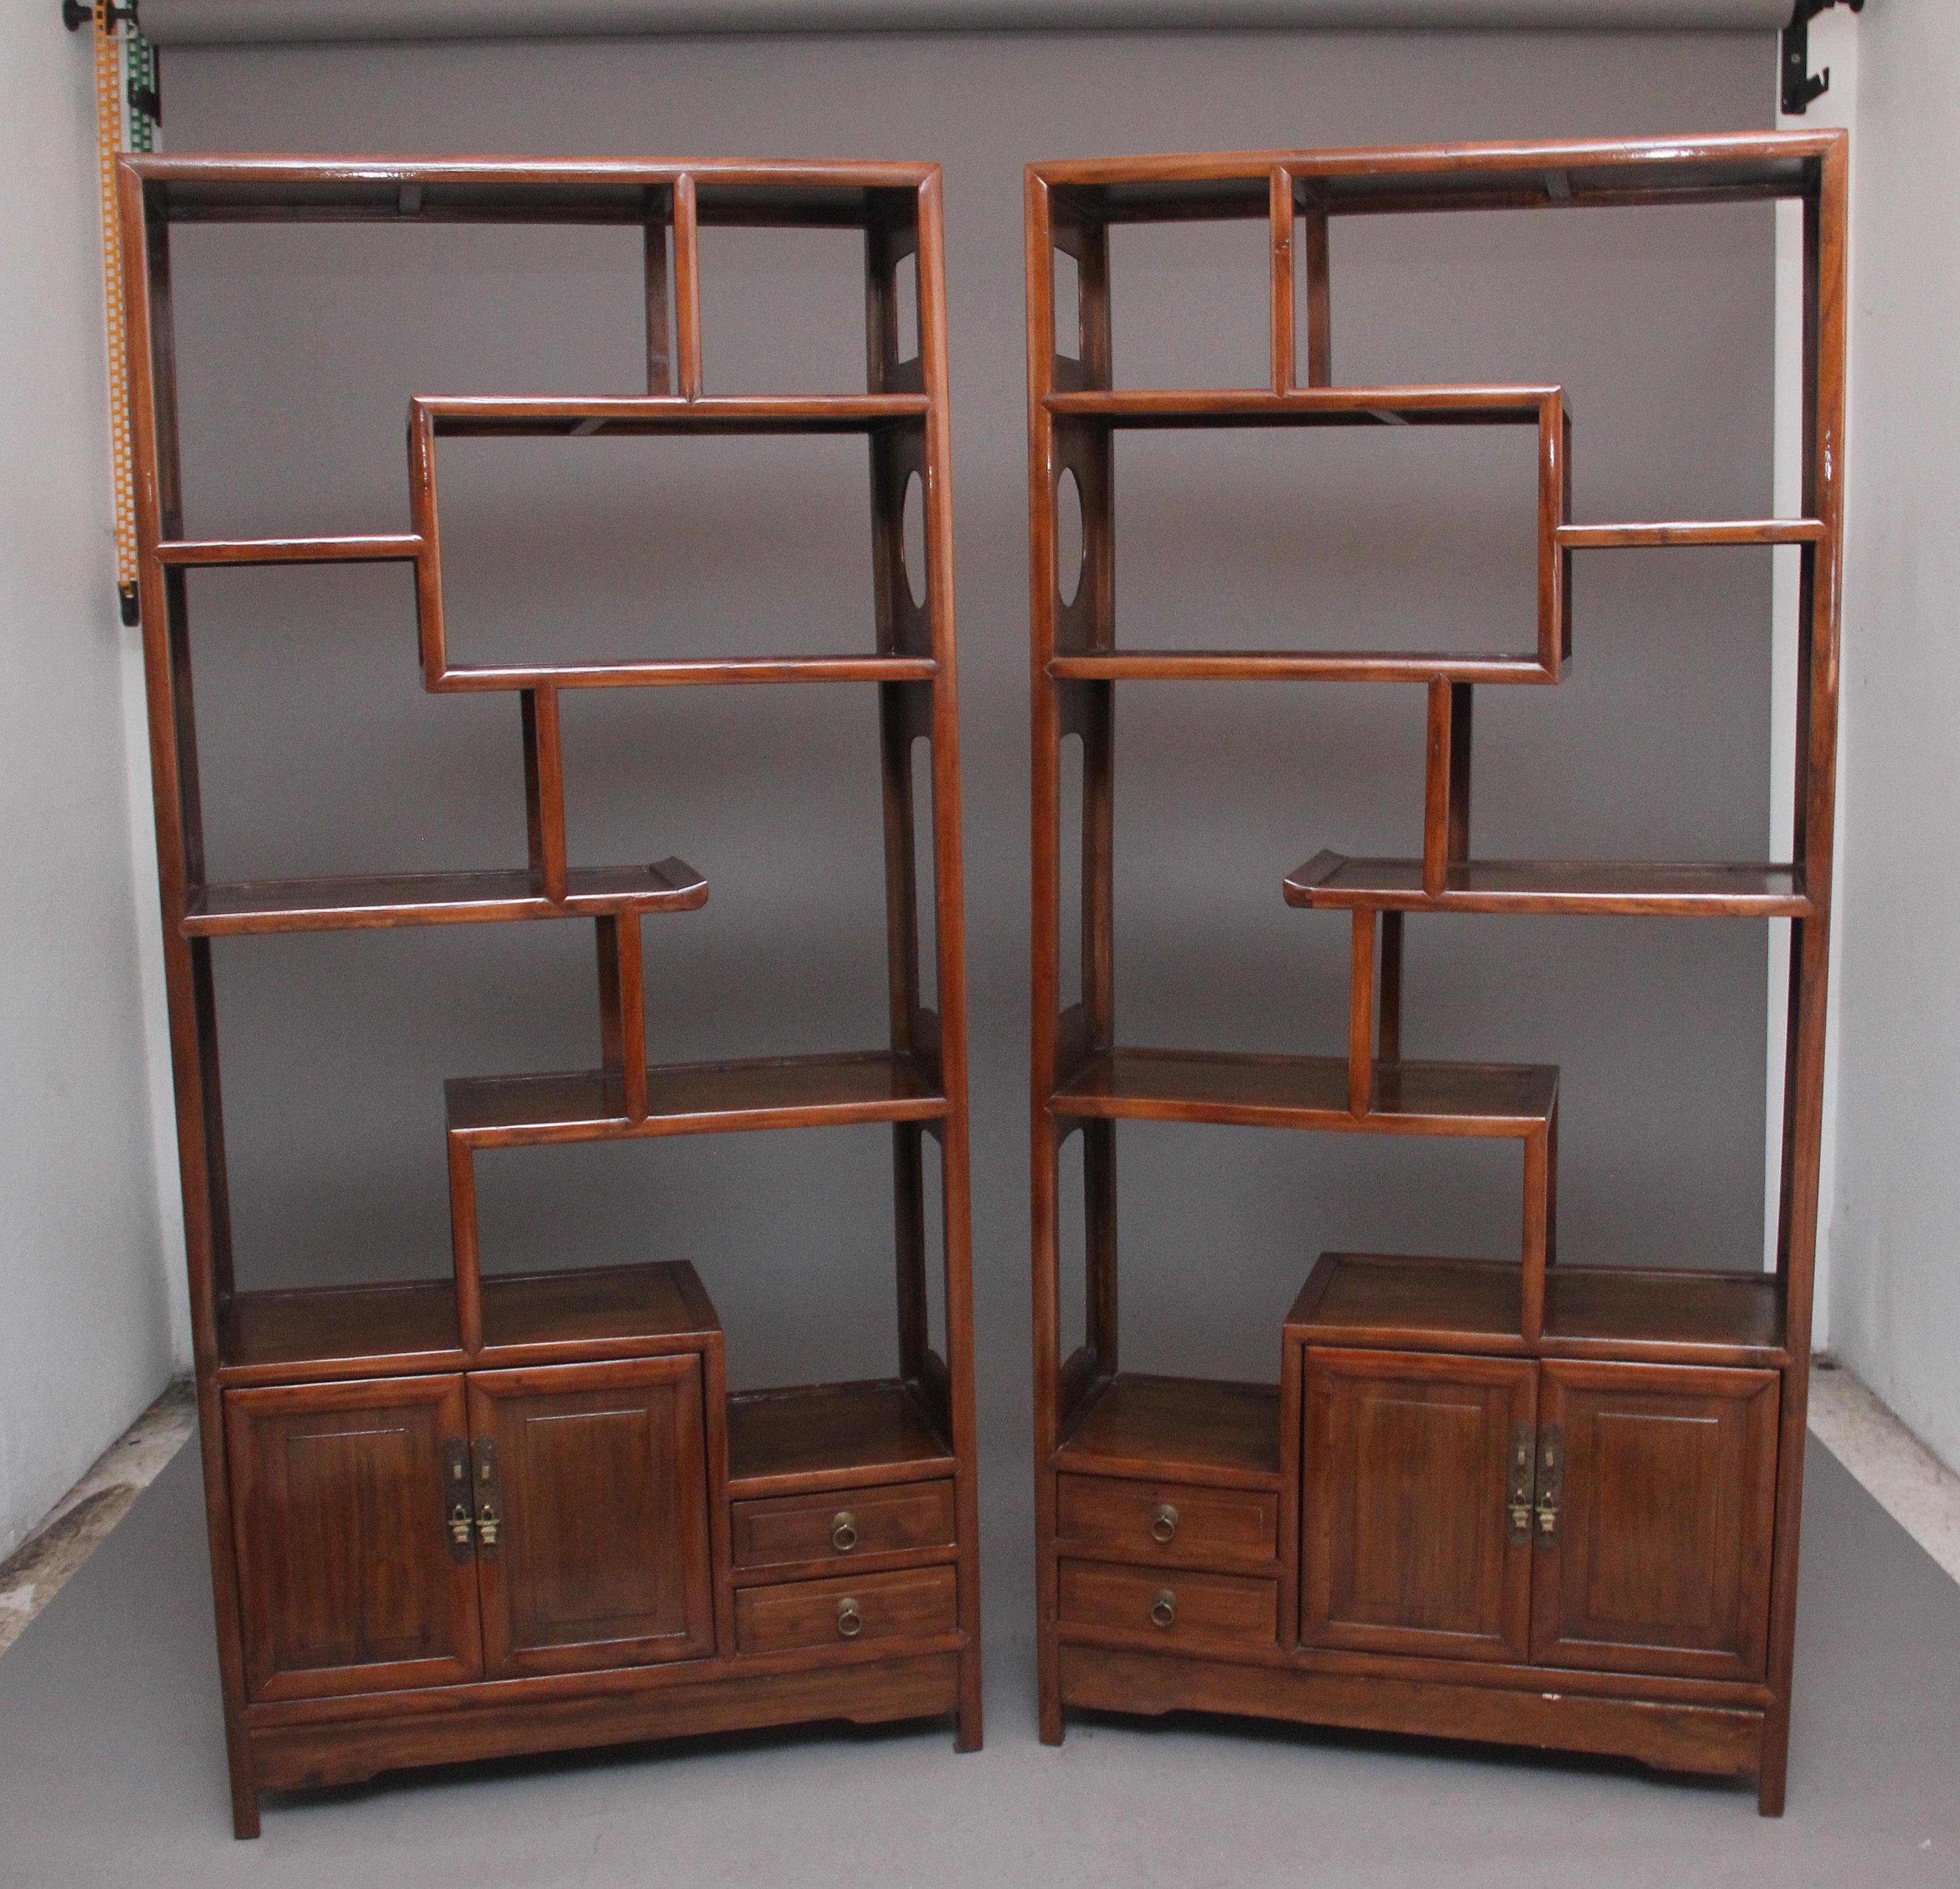 A pair of early 20th Century Chinese hardwood display cabinets, each cabinet having a nice arrangement of shelves with cupboards and drawers below, all having the original brassware, the sides of the cabinets having decorative shaped cut outs. Ideal